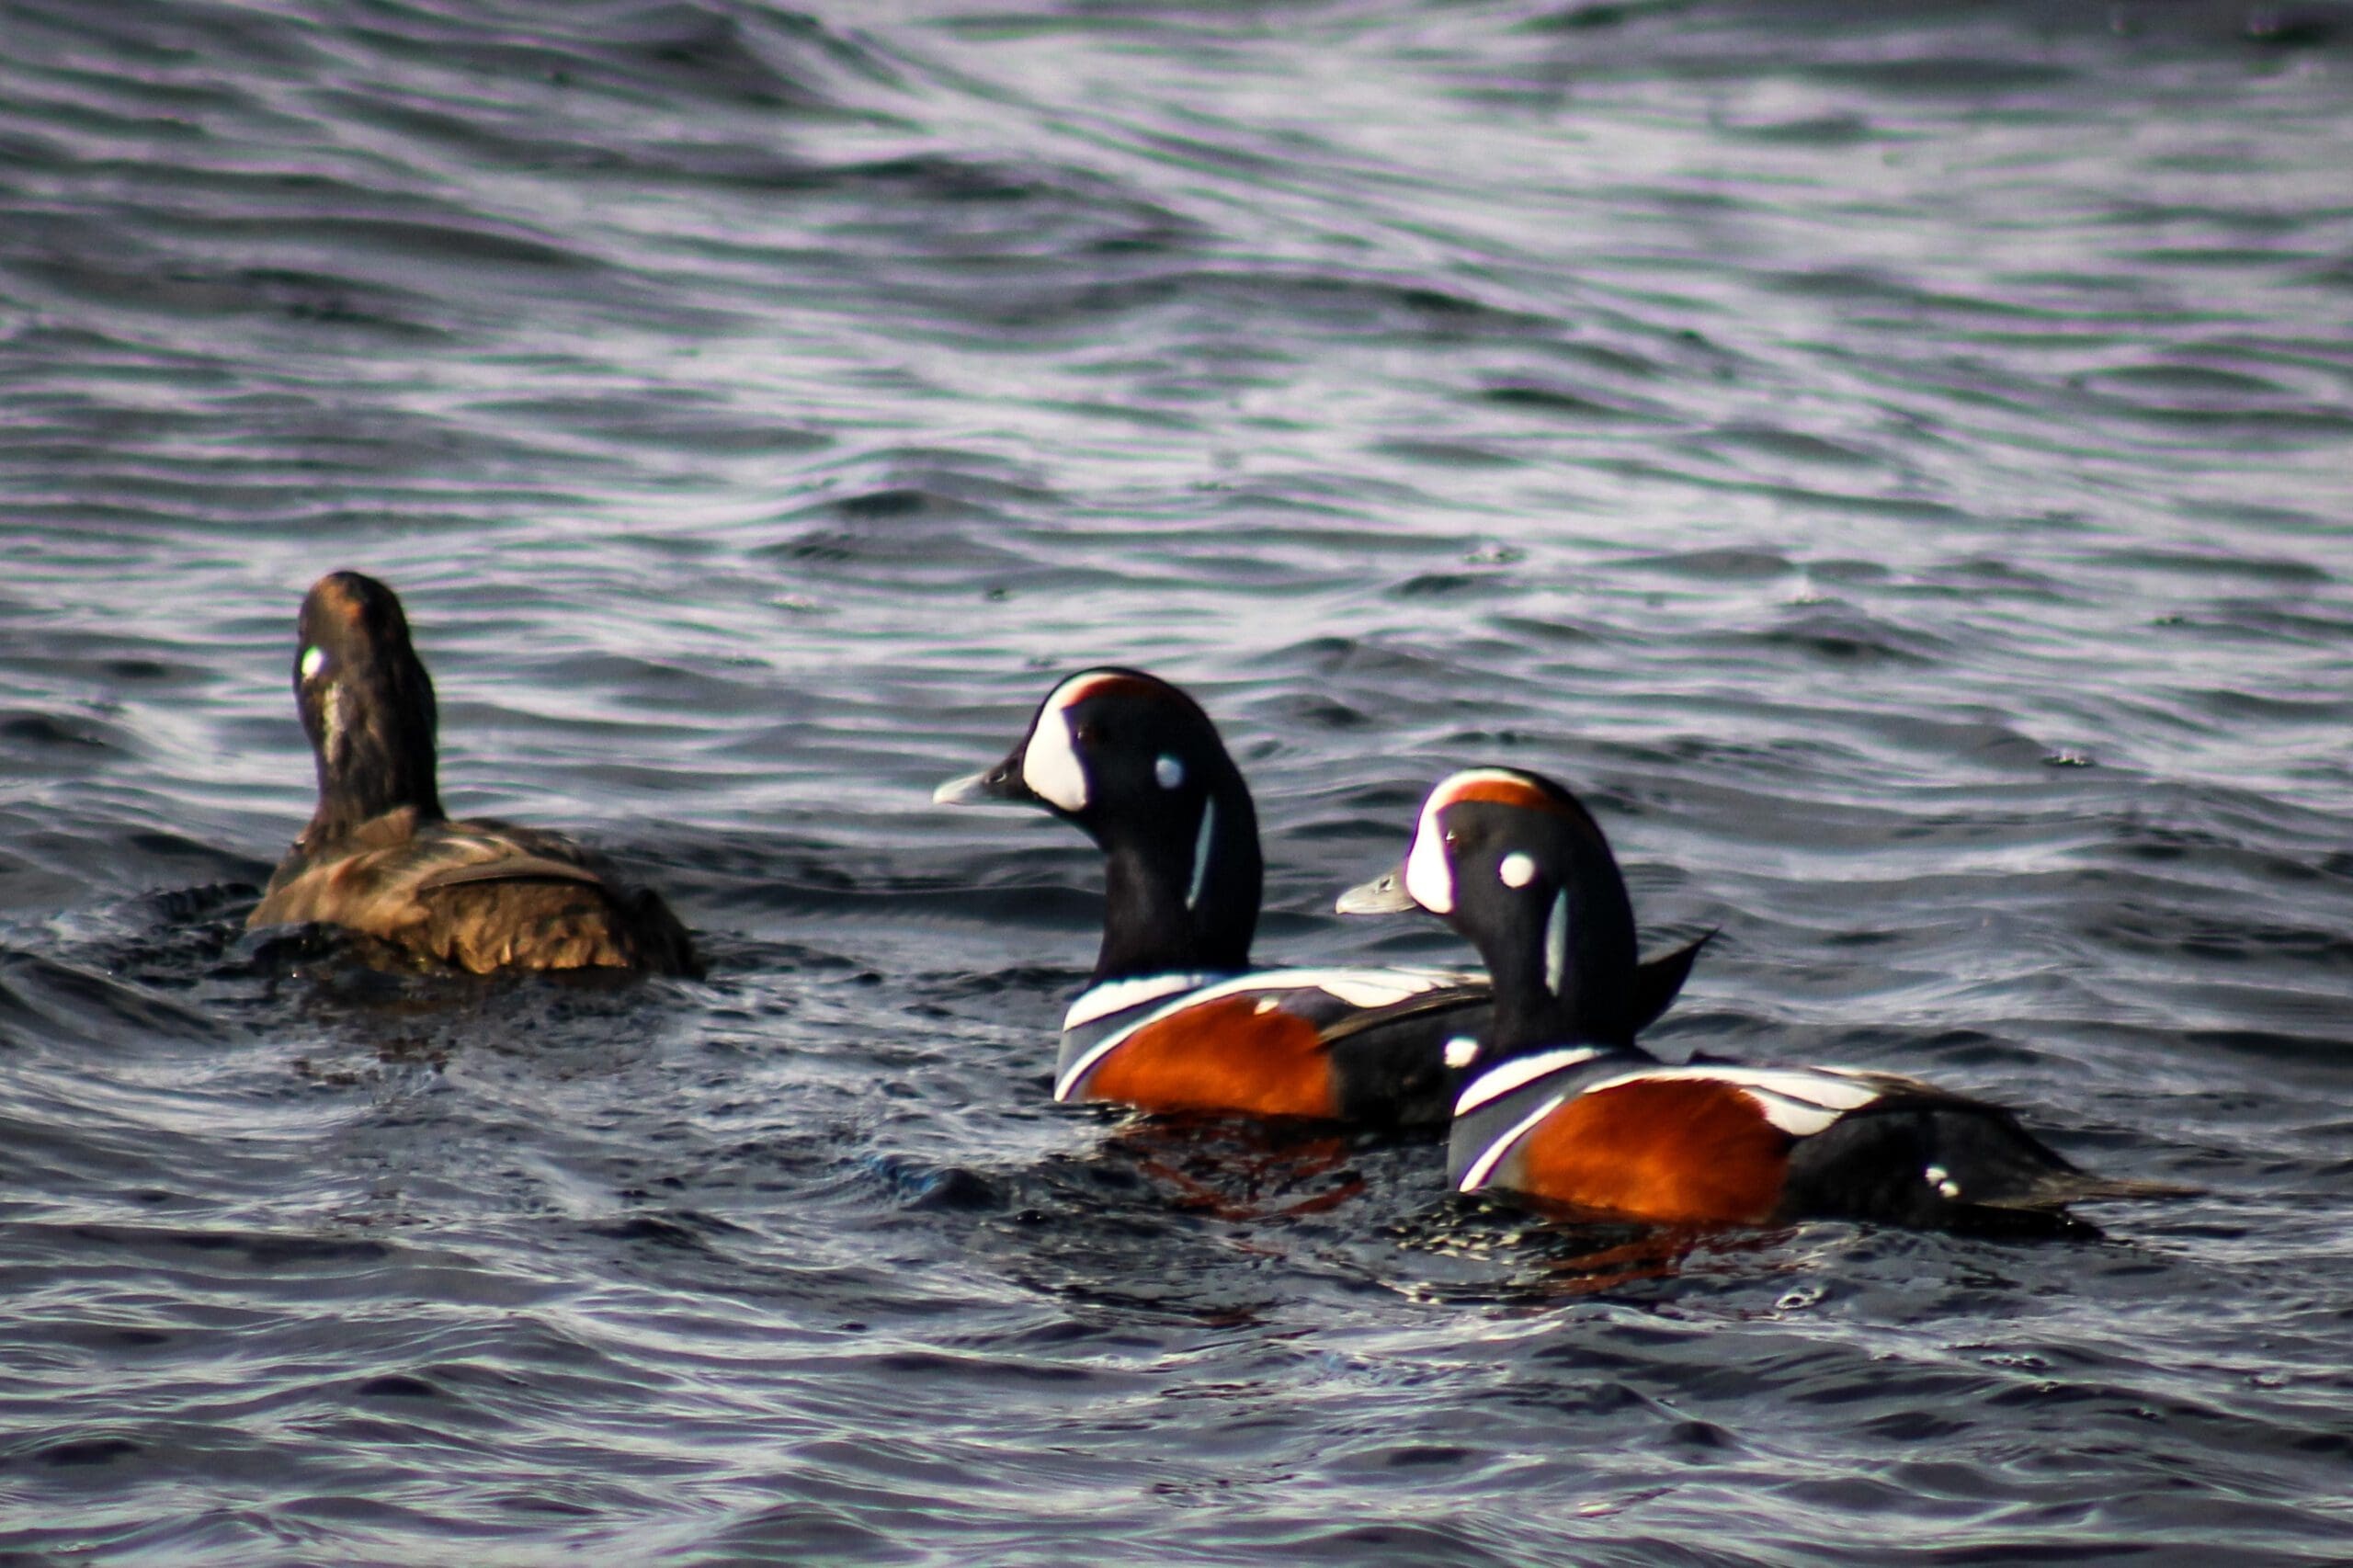 Harlequin ducks are often spotted on our tour.